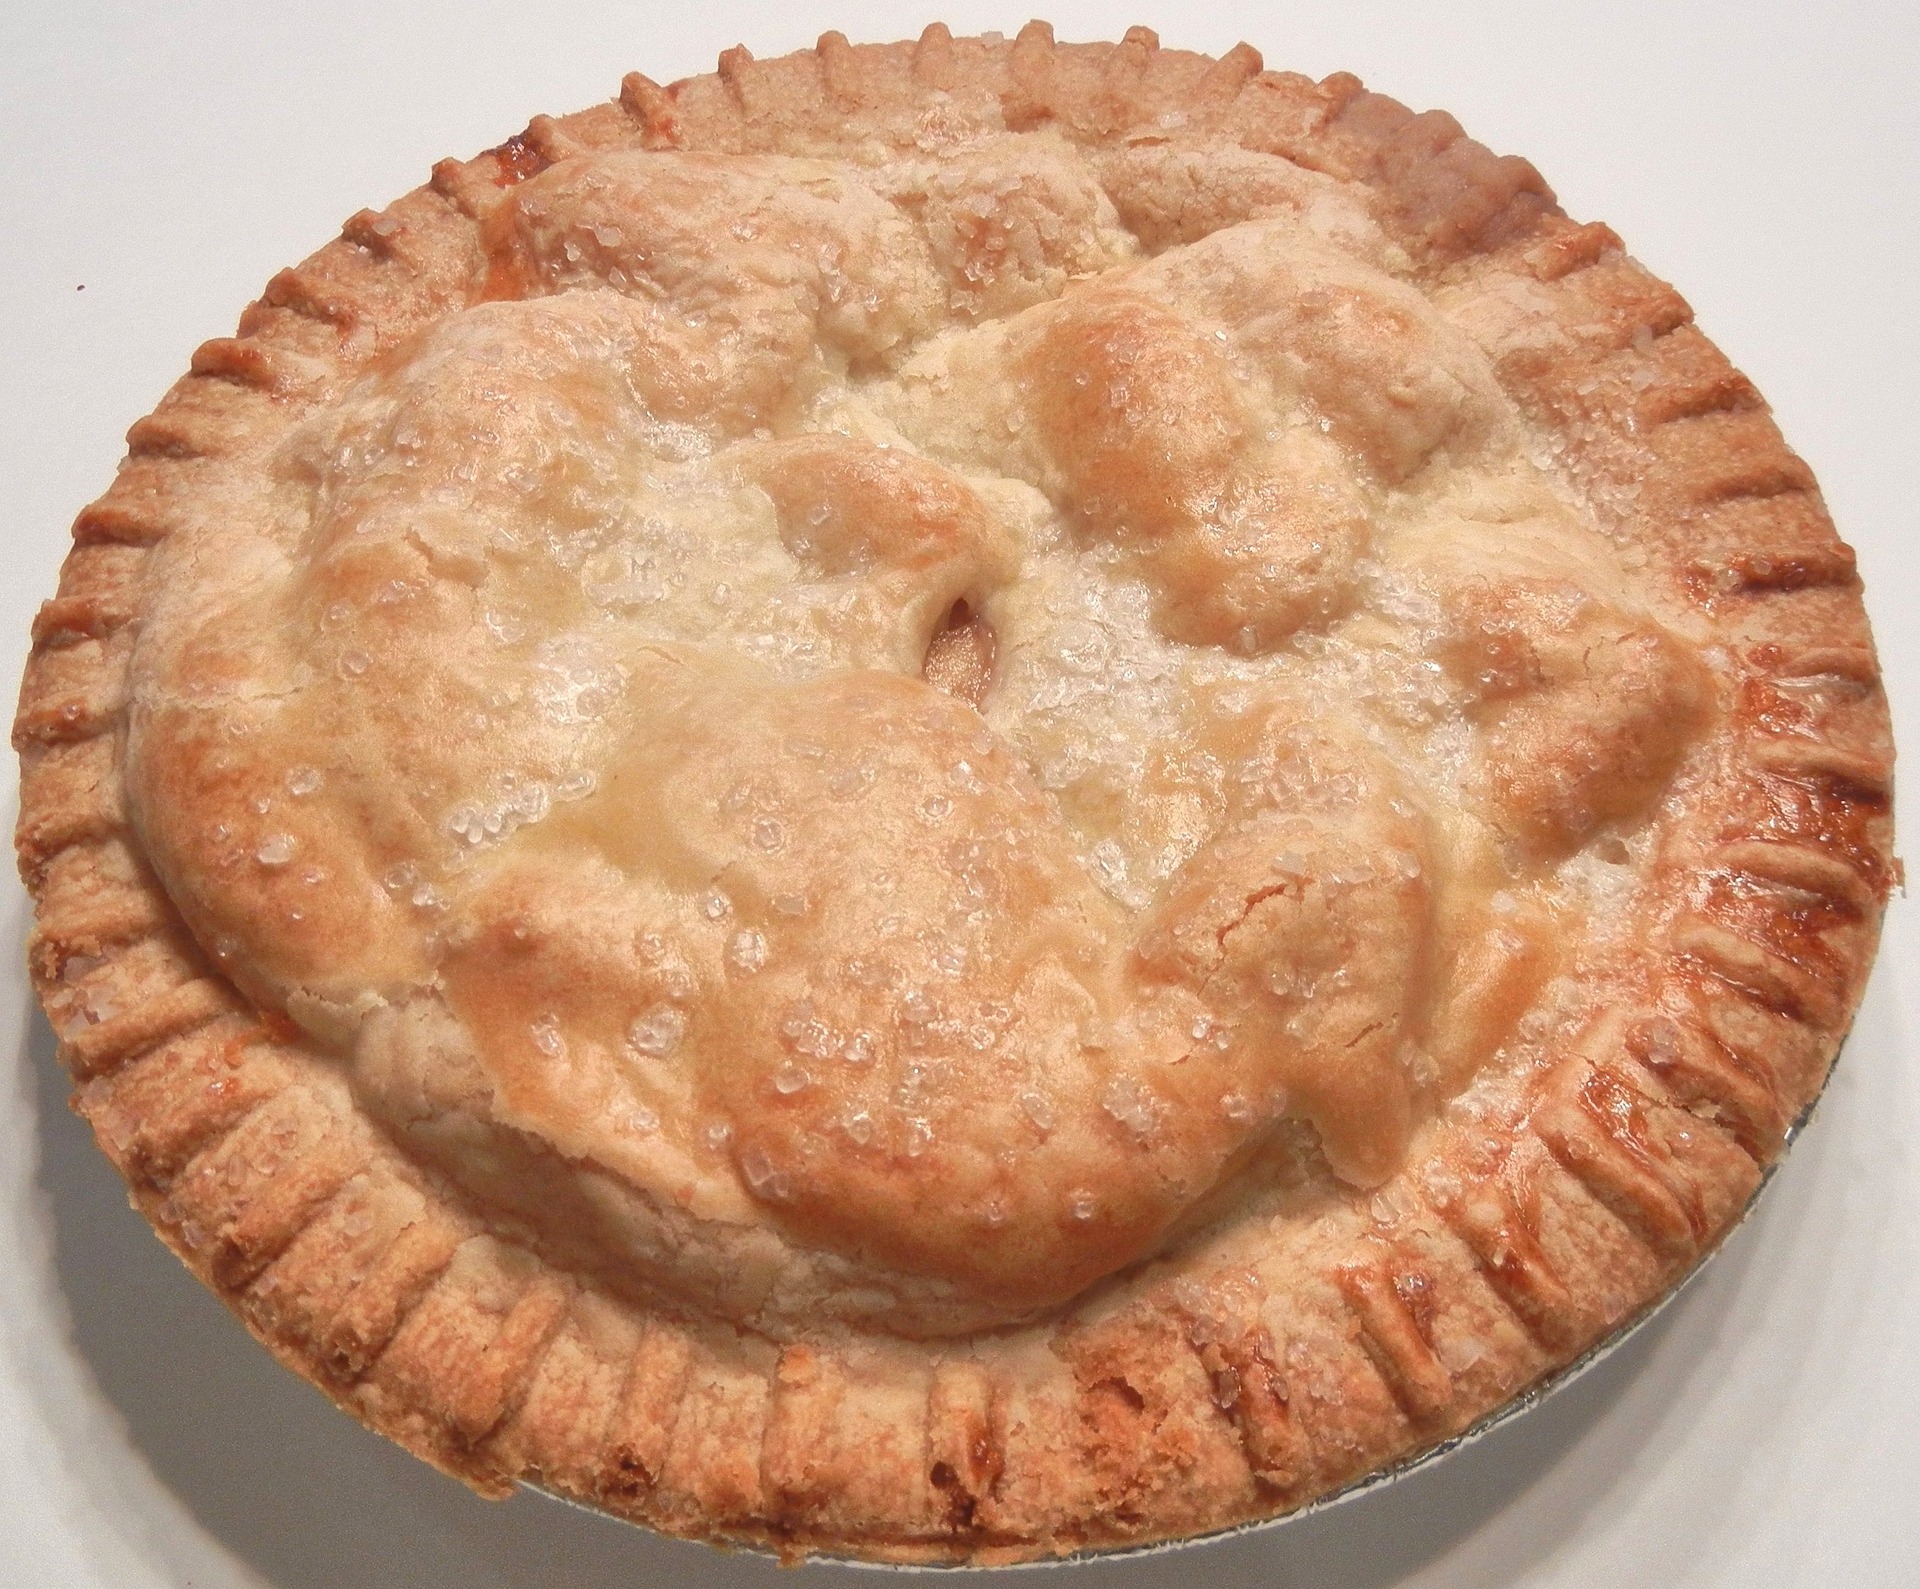 Kentish Apple and Cheese Pie, image from Pixel1, pixabay.com